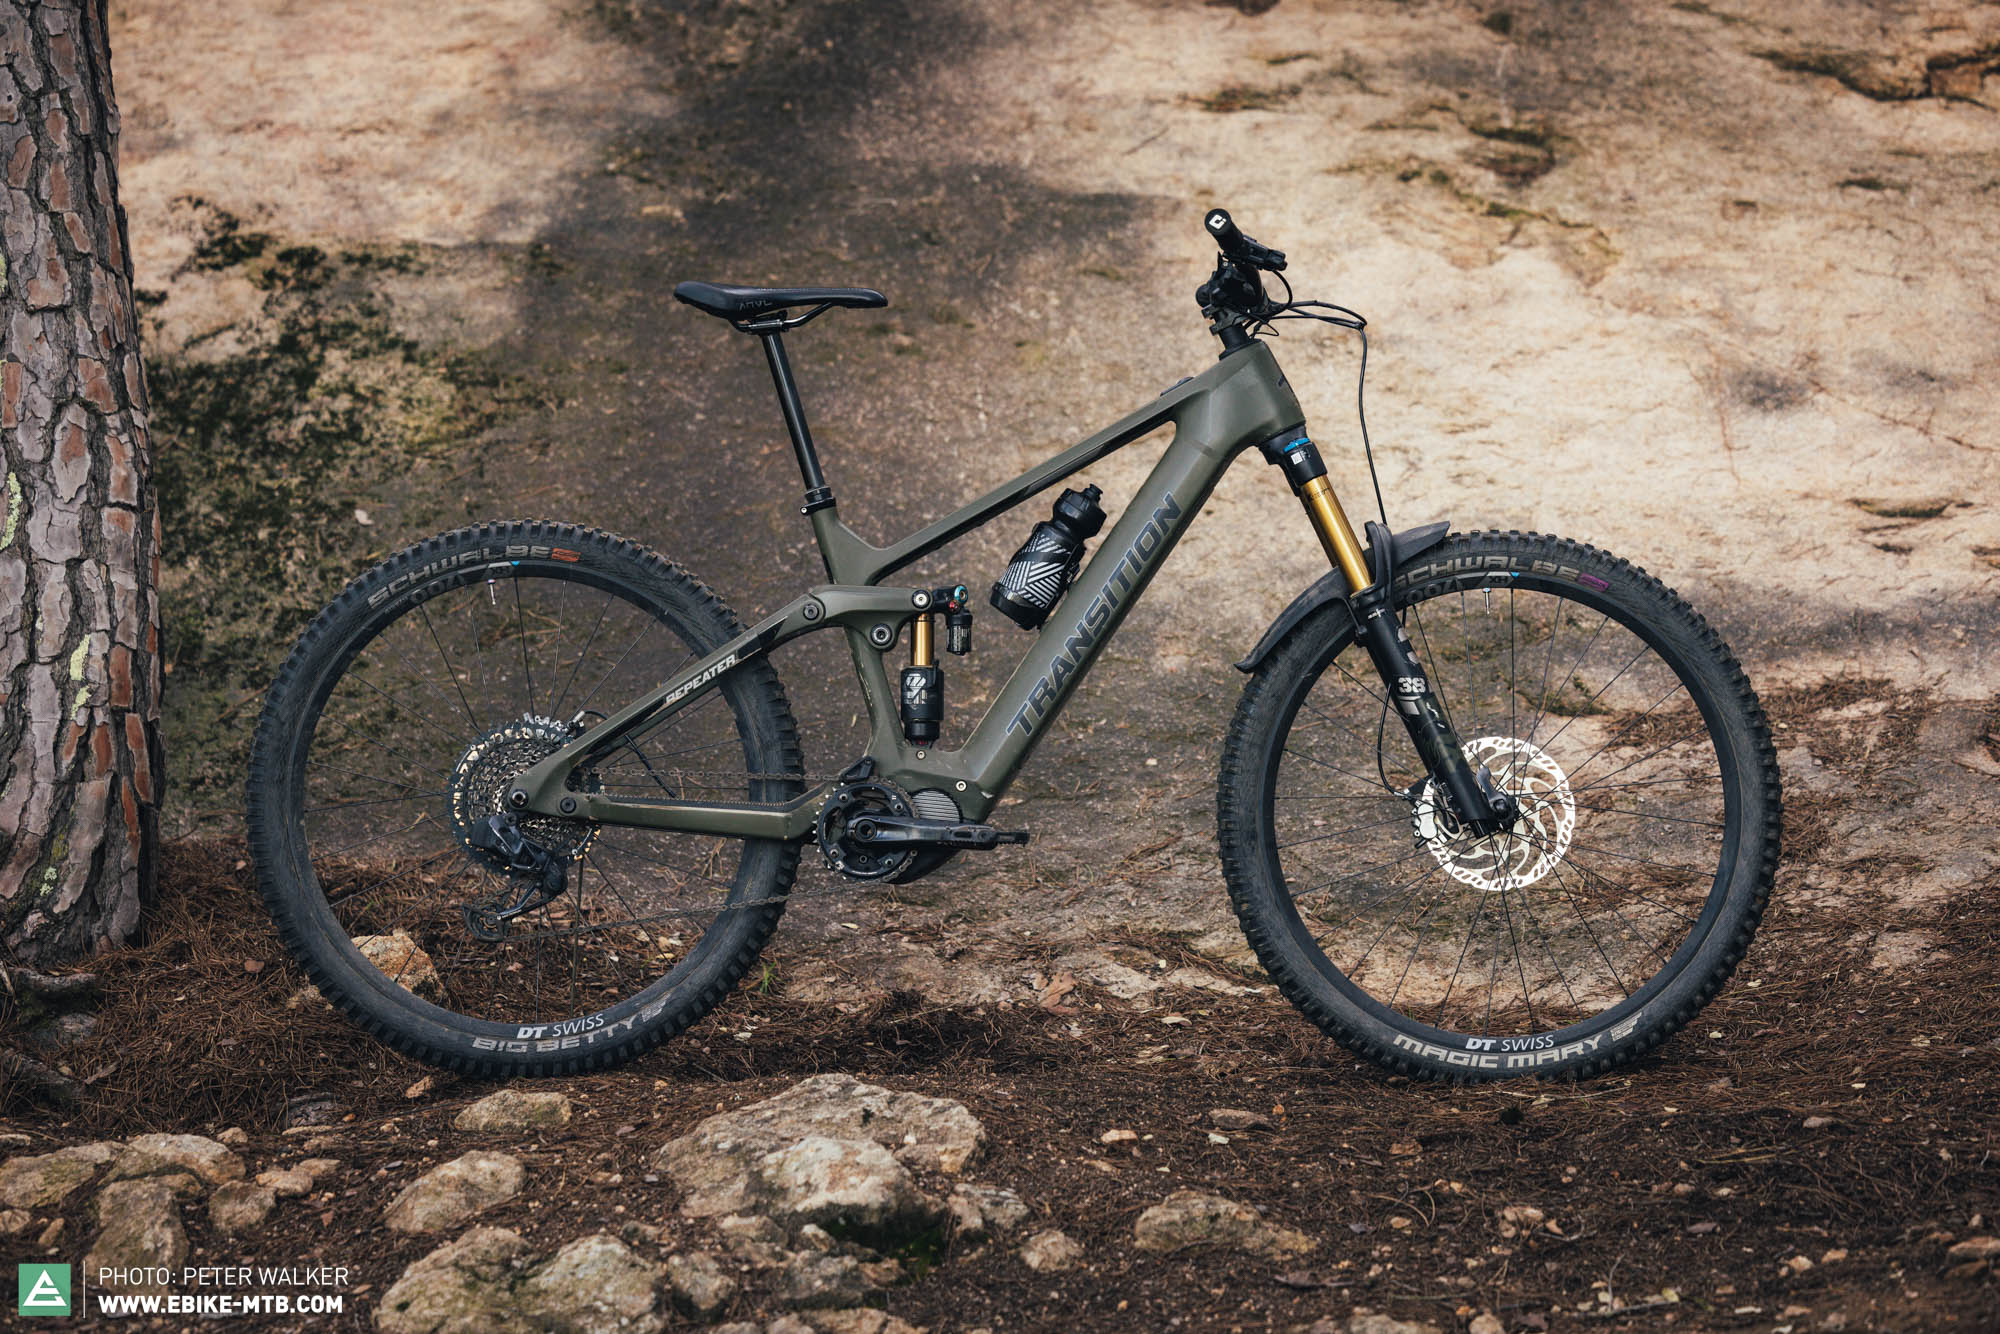 The Transition Repeater AXS Carbon – In our huge “Best e-mountainbike of 2023” group test